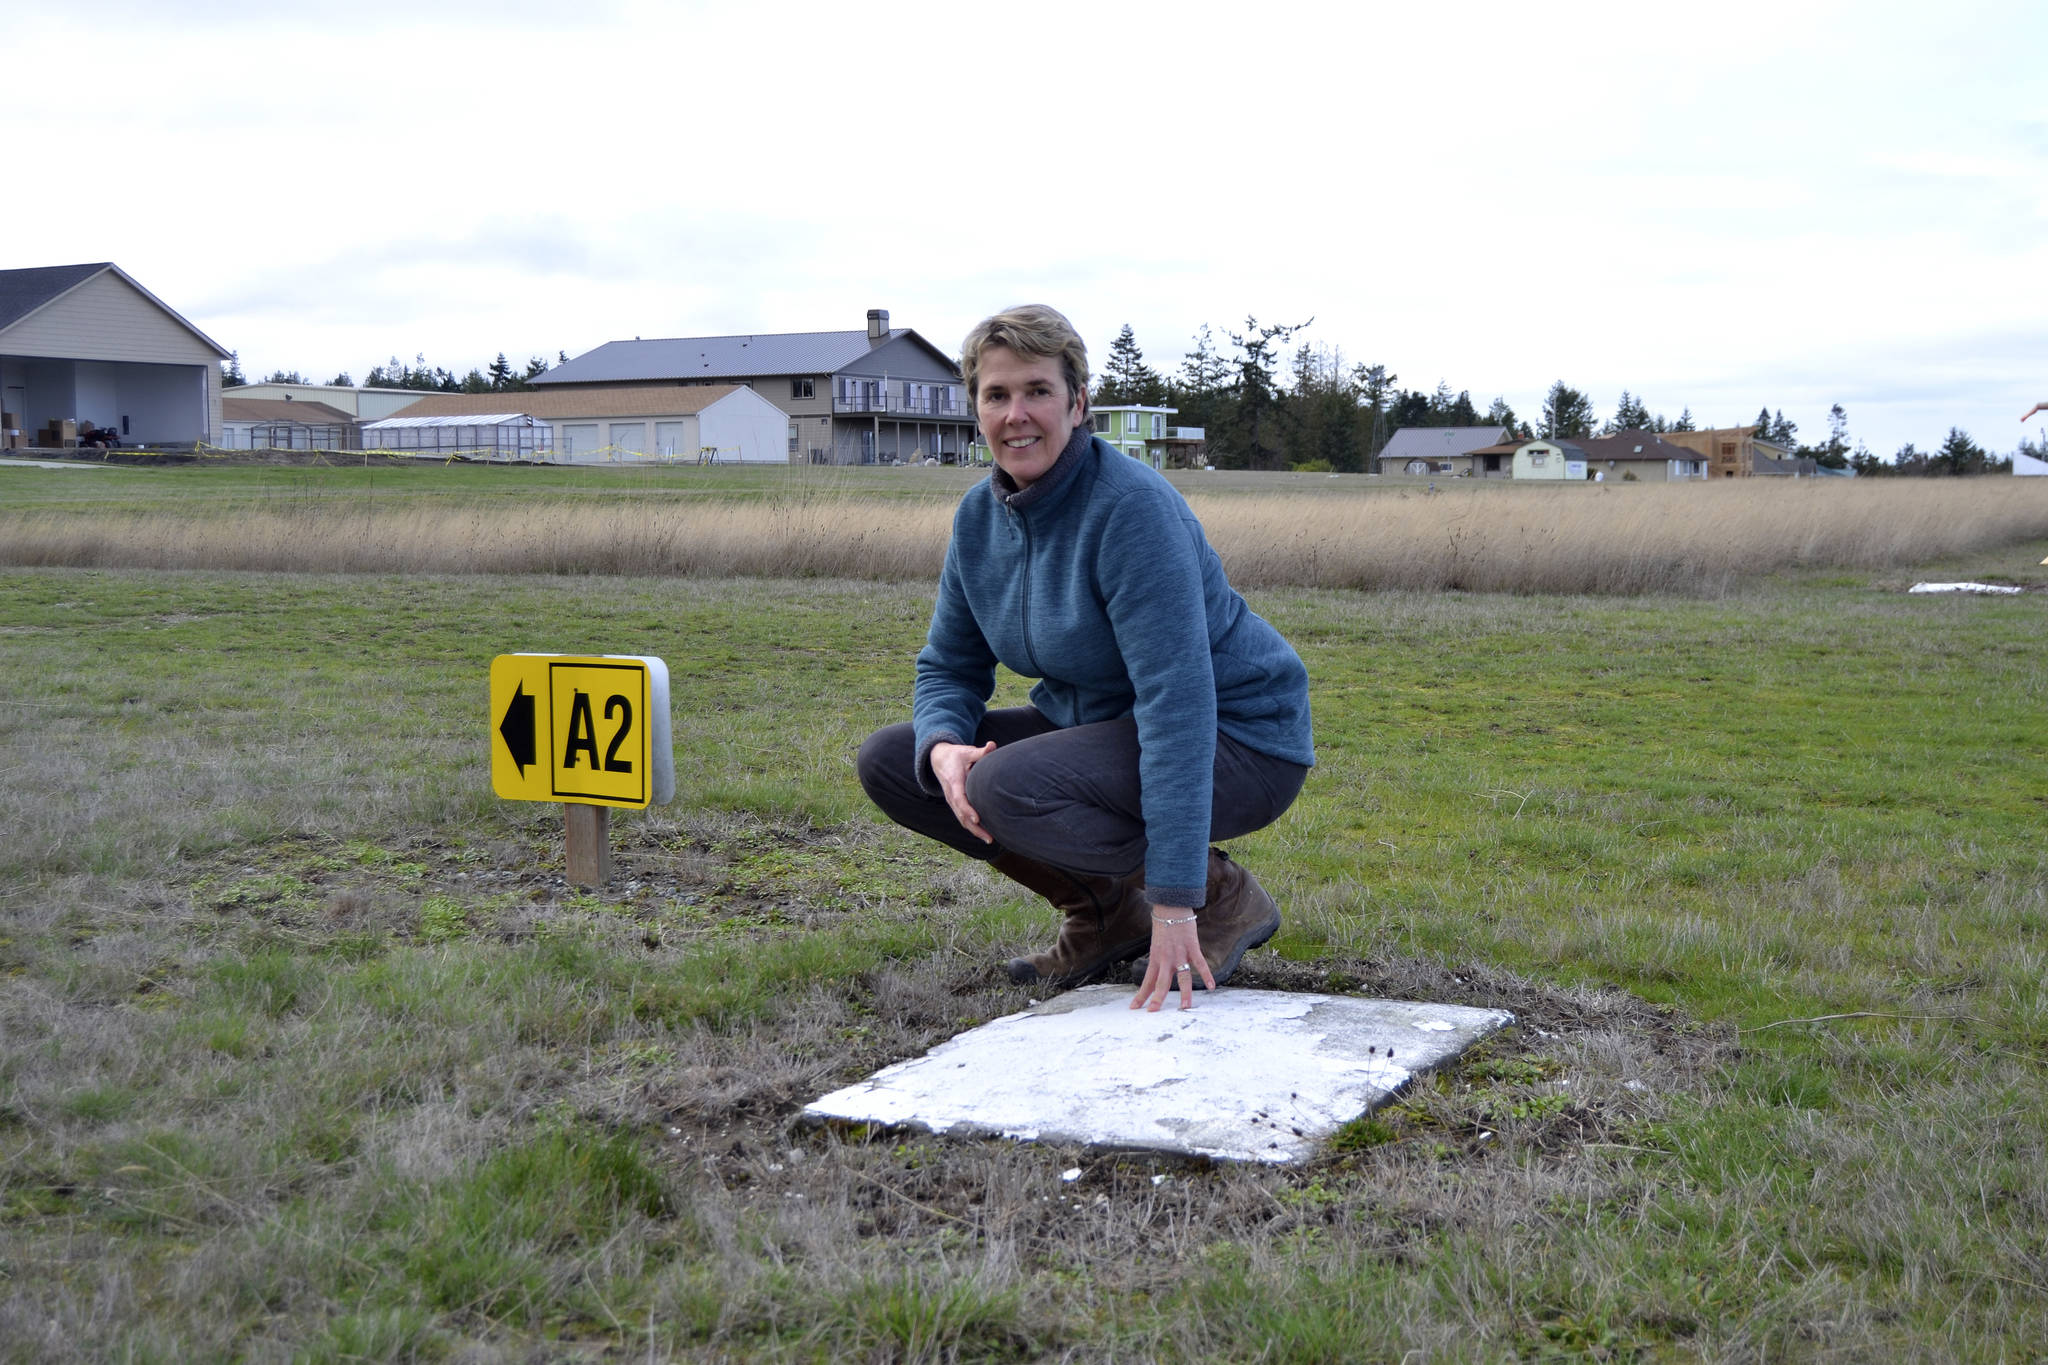 Kaye Gagnon, volunteer for the Diamond Point Airport Association, stands near one of the four corners of the Diamond Point Airport’s helipad. Airport Association members seek up to $8,000 to support paving the helipad to make it safer for airlifts. Sequim Gazette photo by Matthew Nash